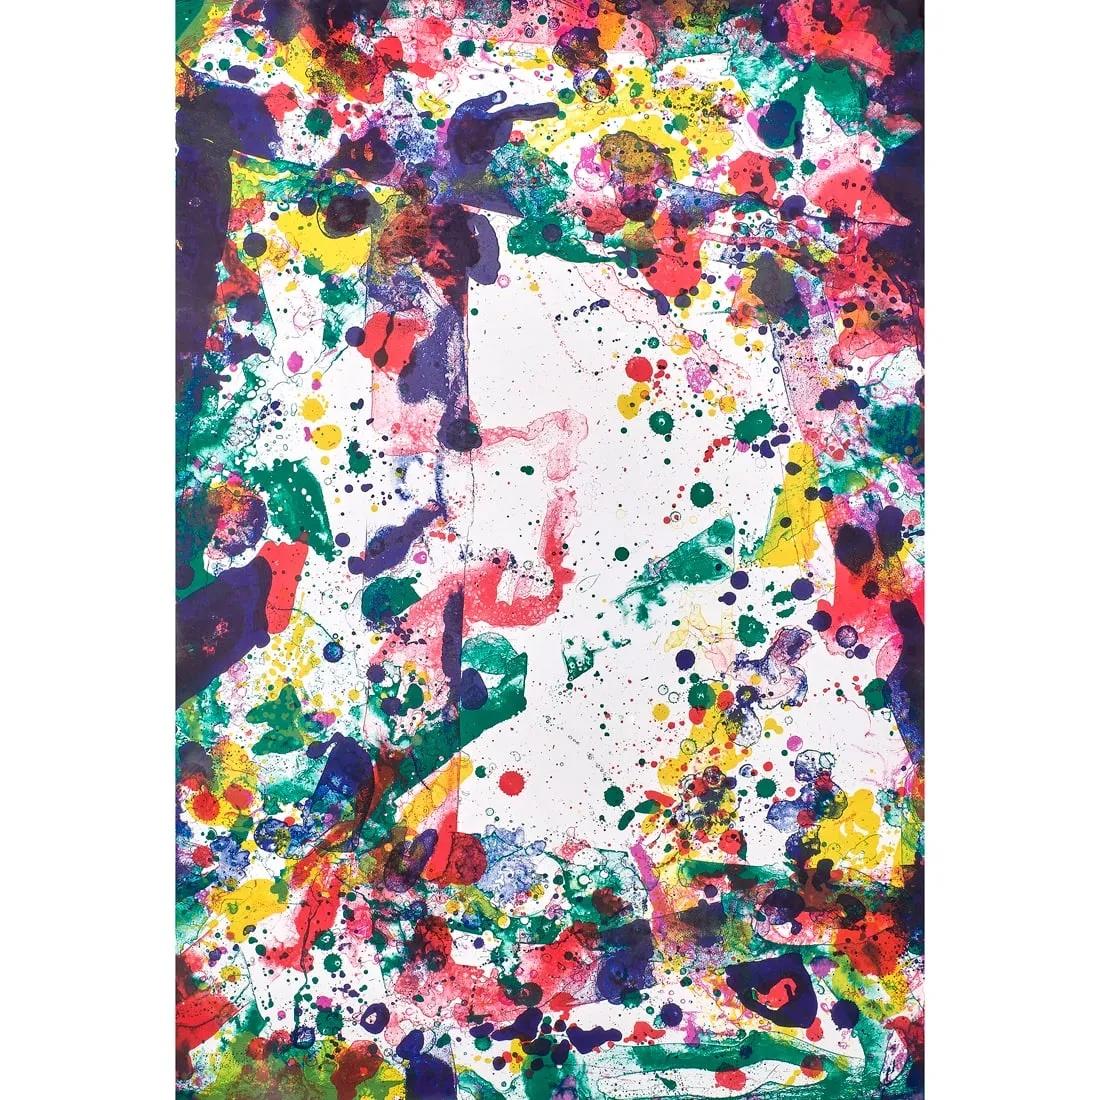 Sam Francis Abstract Print - Vegetable I, from Vegetable Series